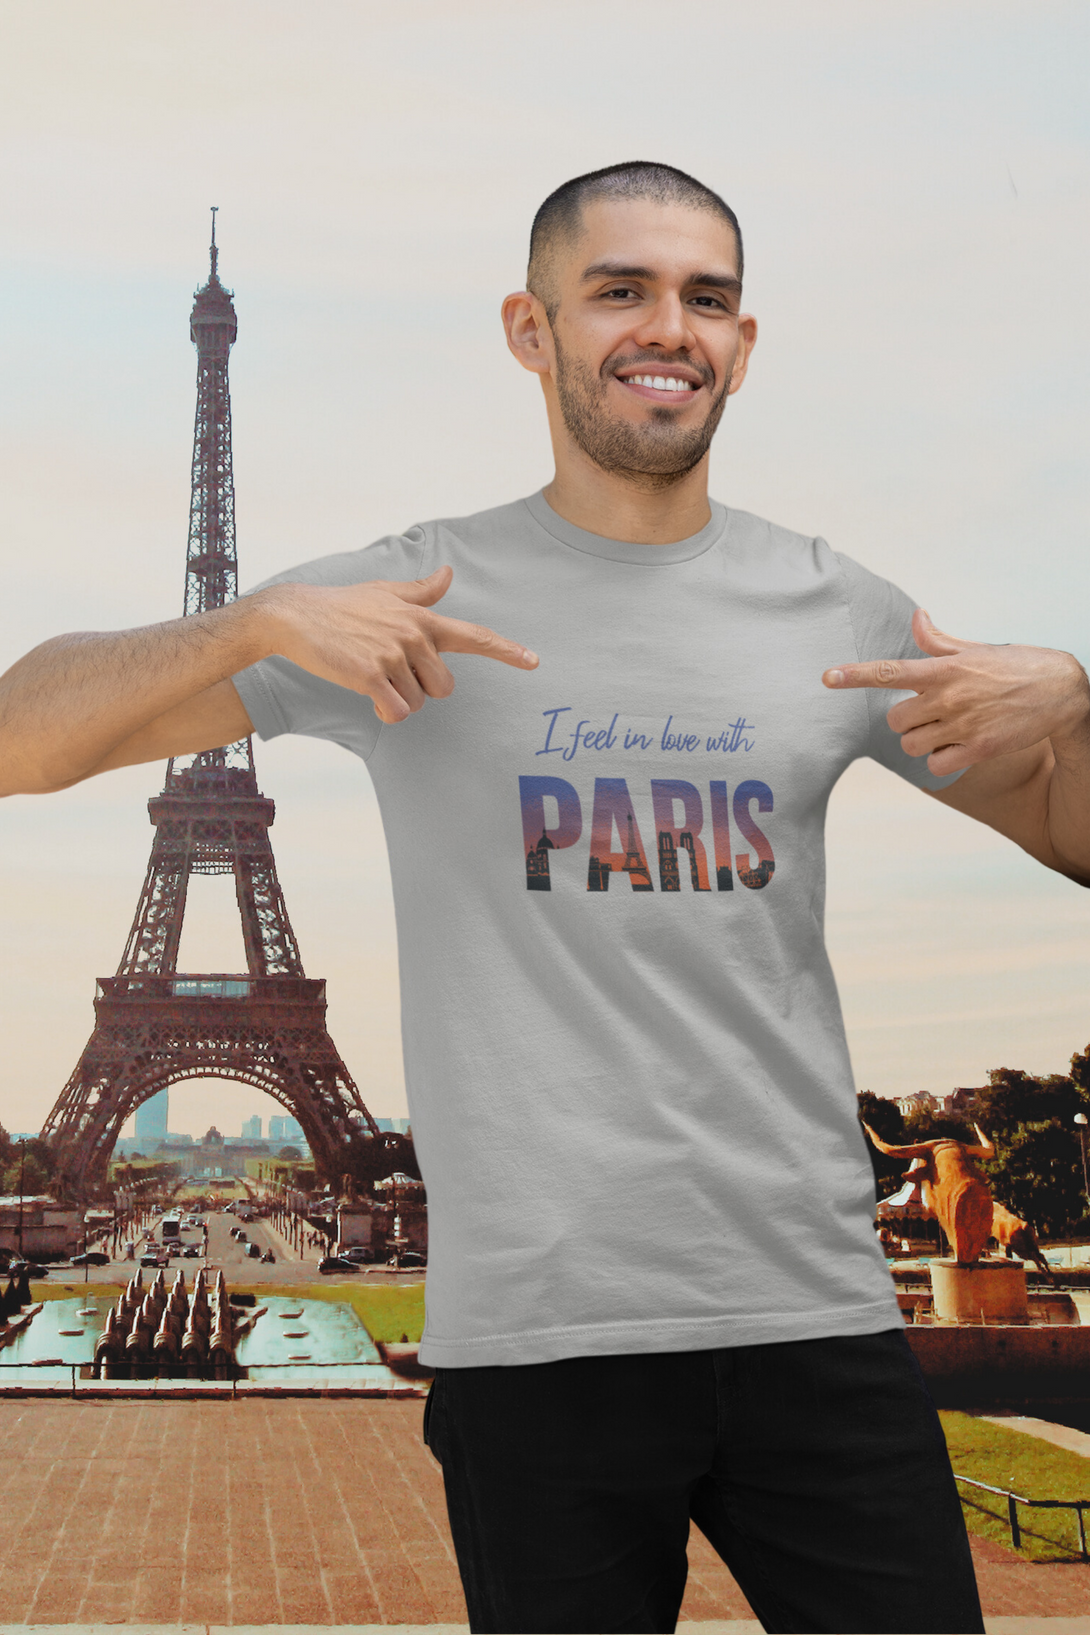 In Love With Paris Printed T-Shirt For Men - WowWaves - 5